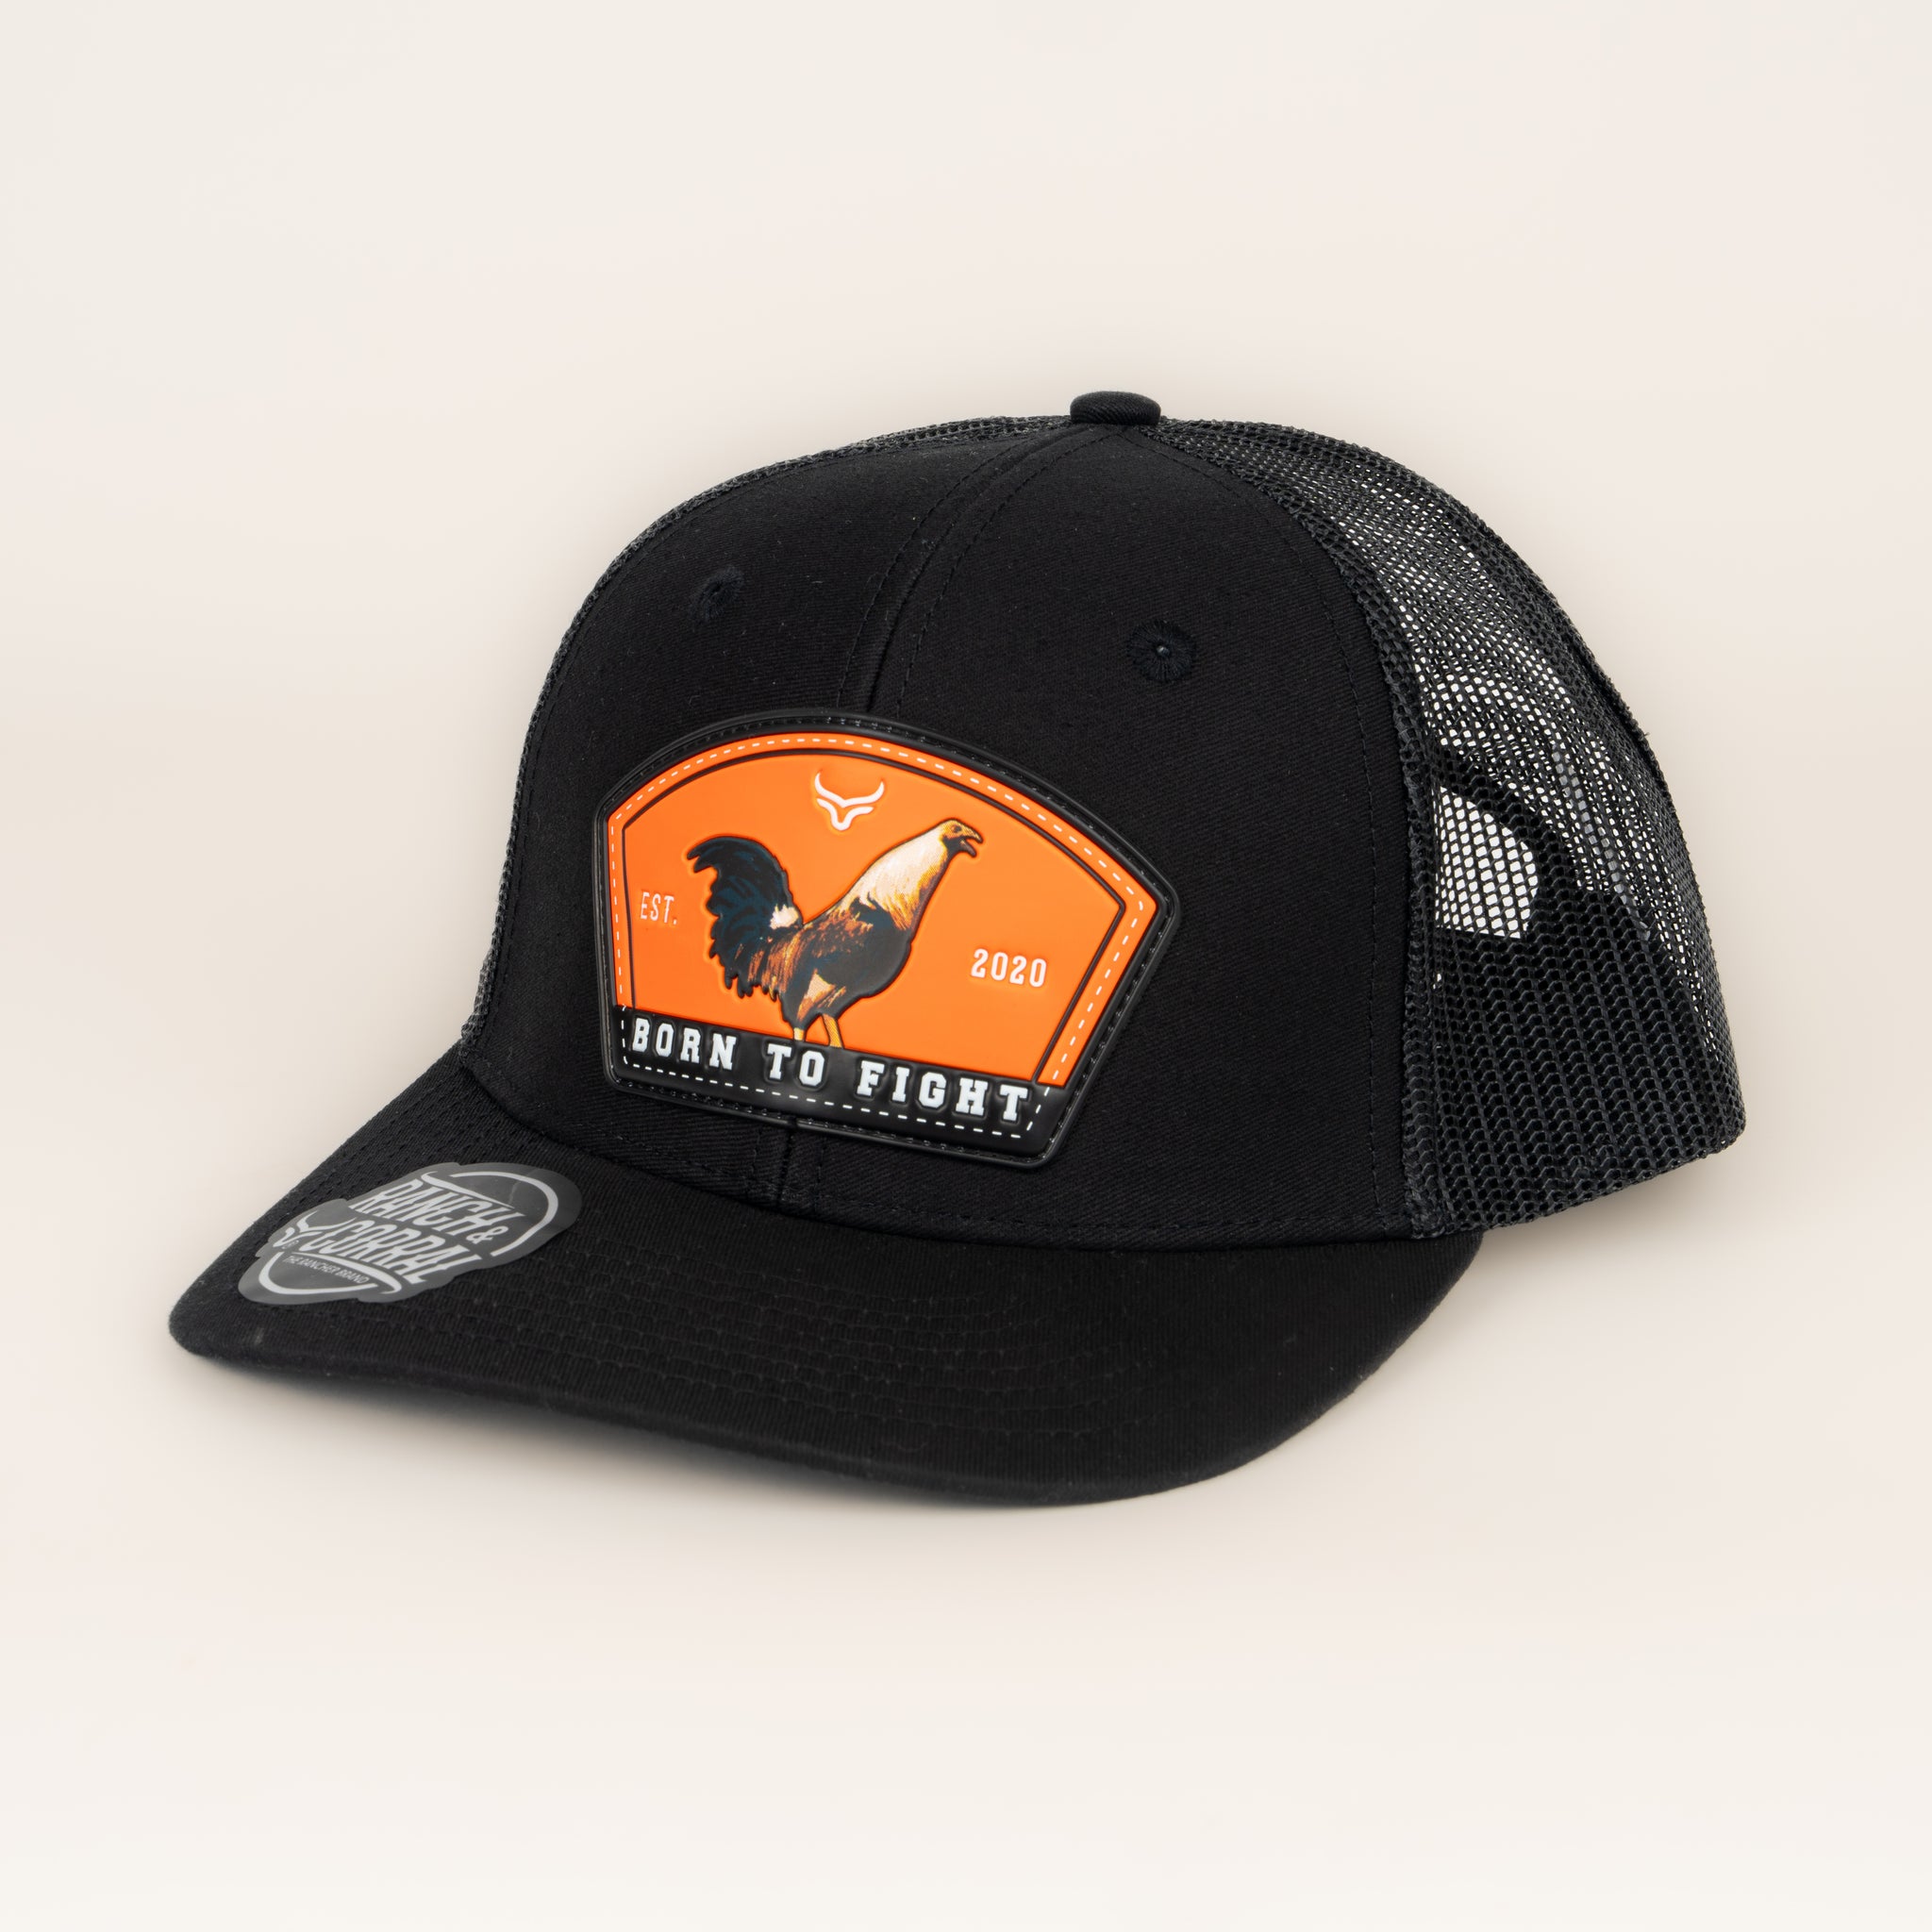 Gorra Ranch & Corral Rooster 15